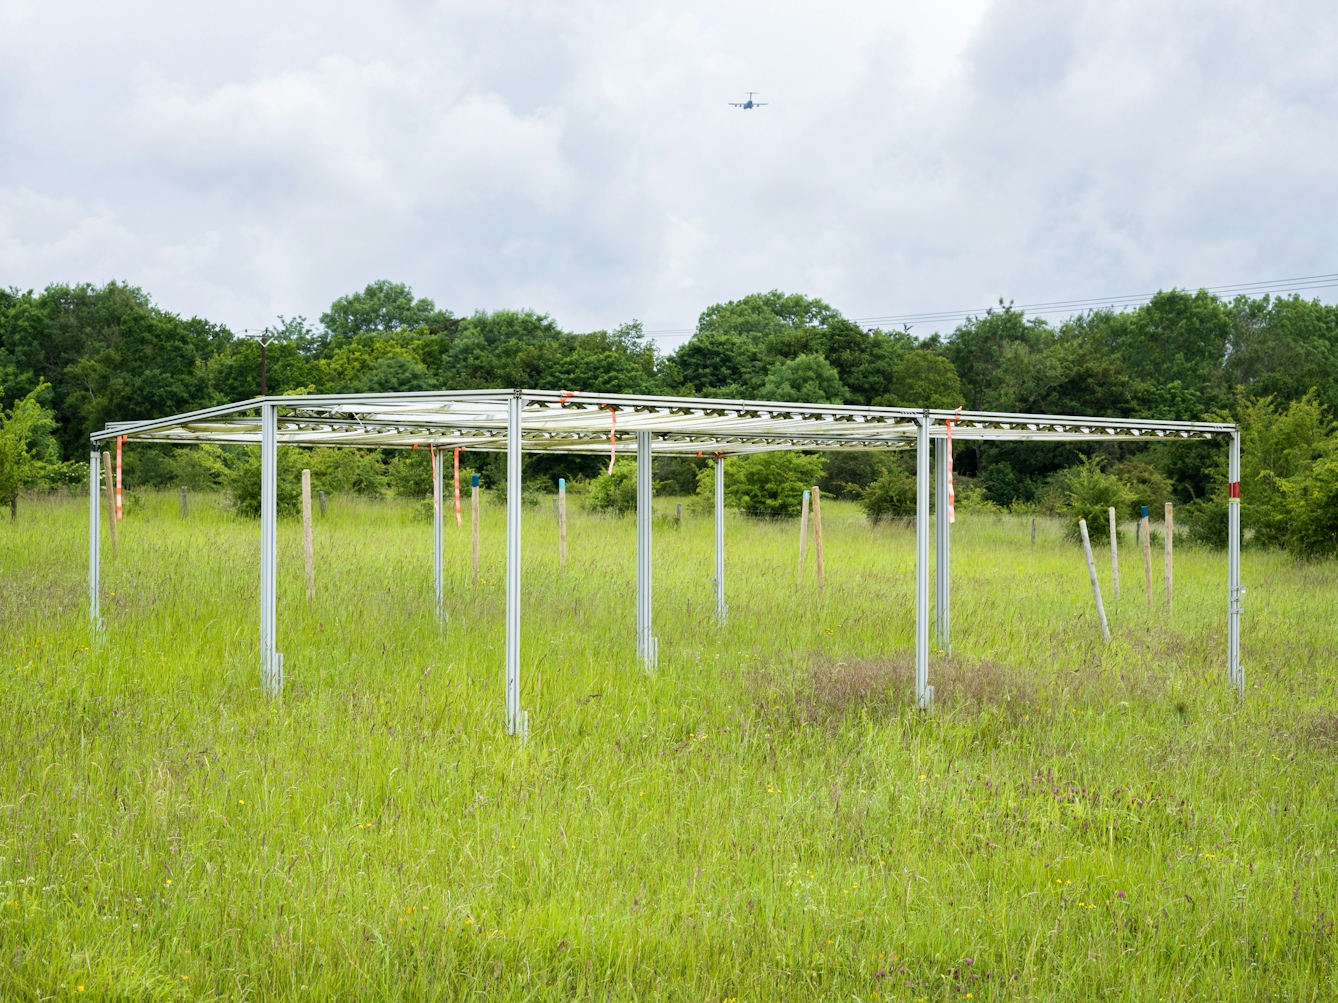 Colour photograph of a wild grassland meadow. In the centre is a large man made metal and wooden framed structure. Behind the frame in the distance is a tree lined border and then a cloudy skyline above. Just visible in the sky is an aircraft flying away from the camera.